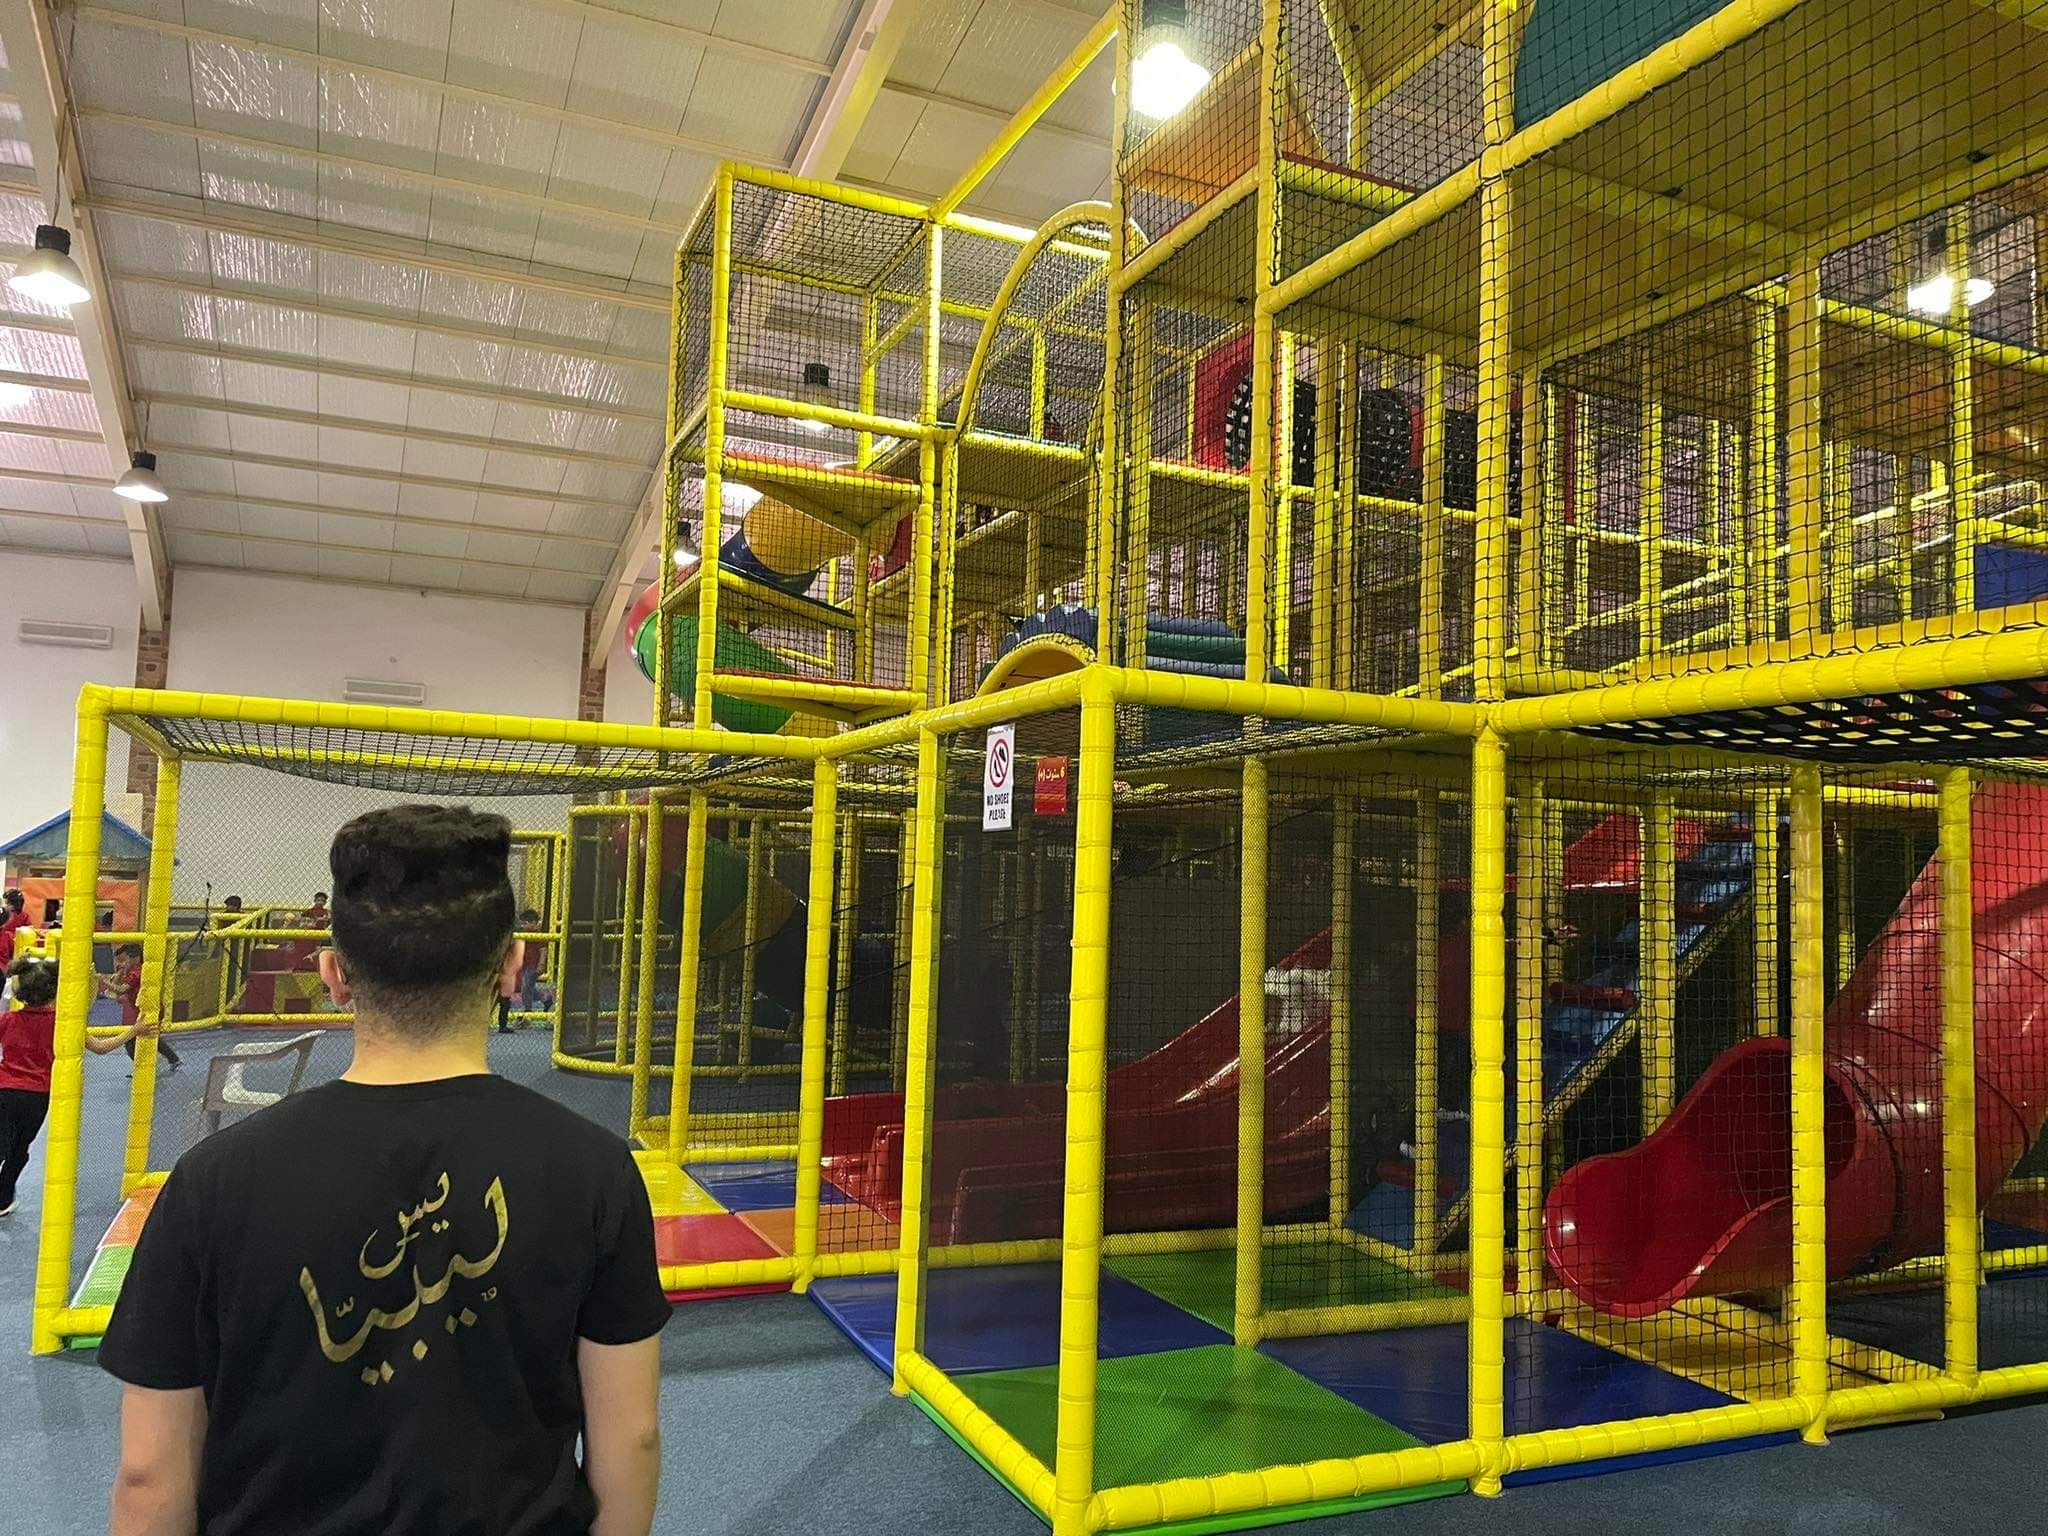 A student looks at a jungle gym